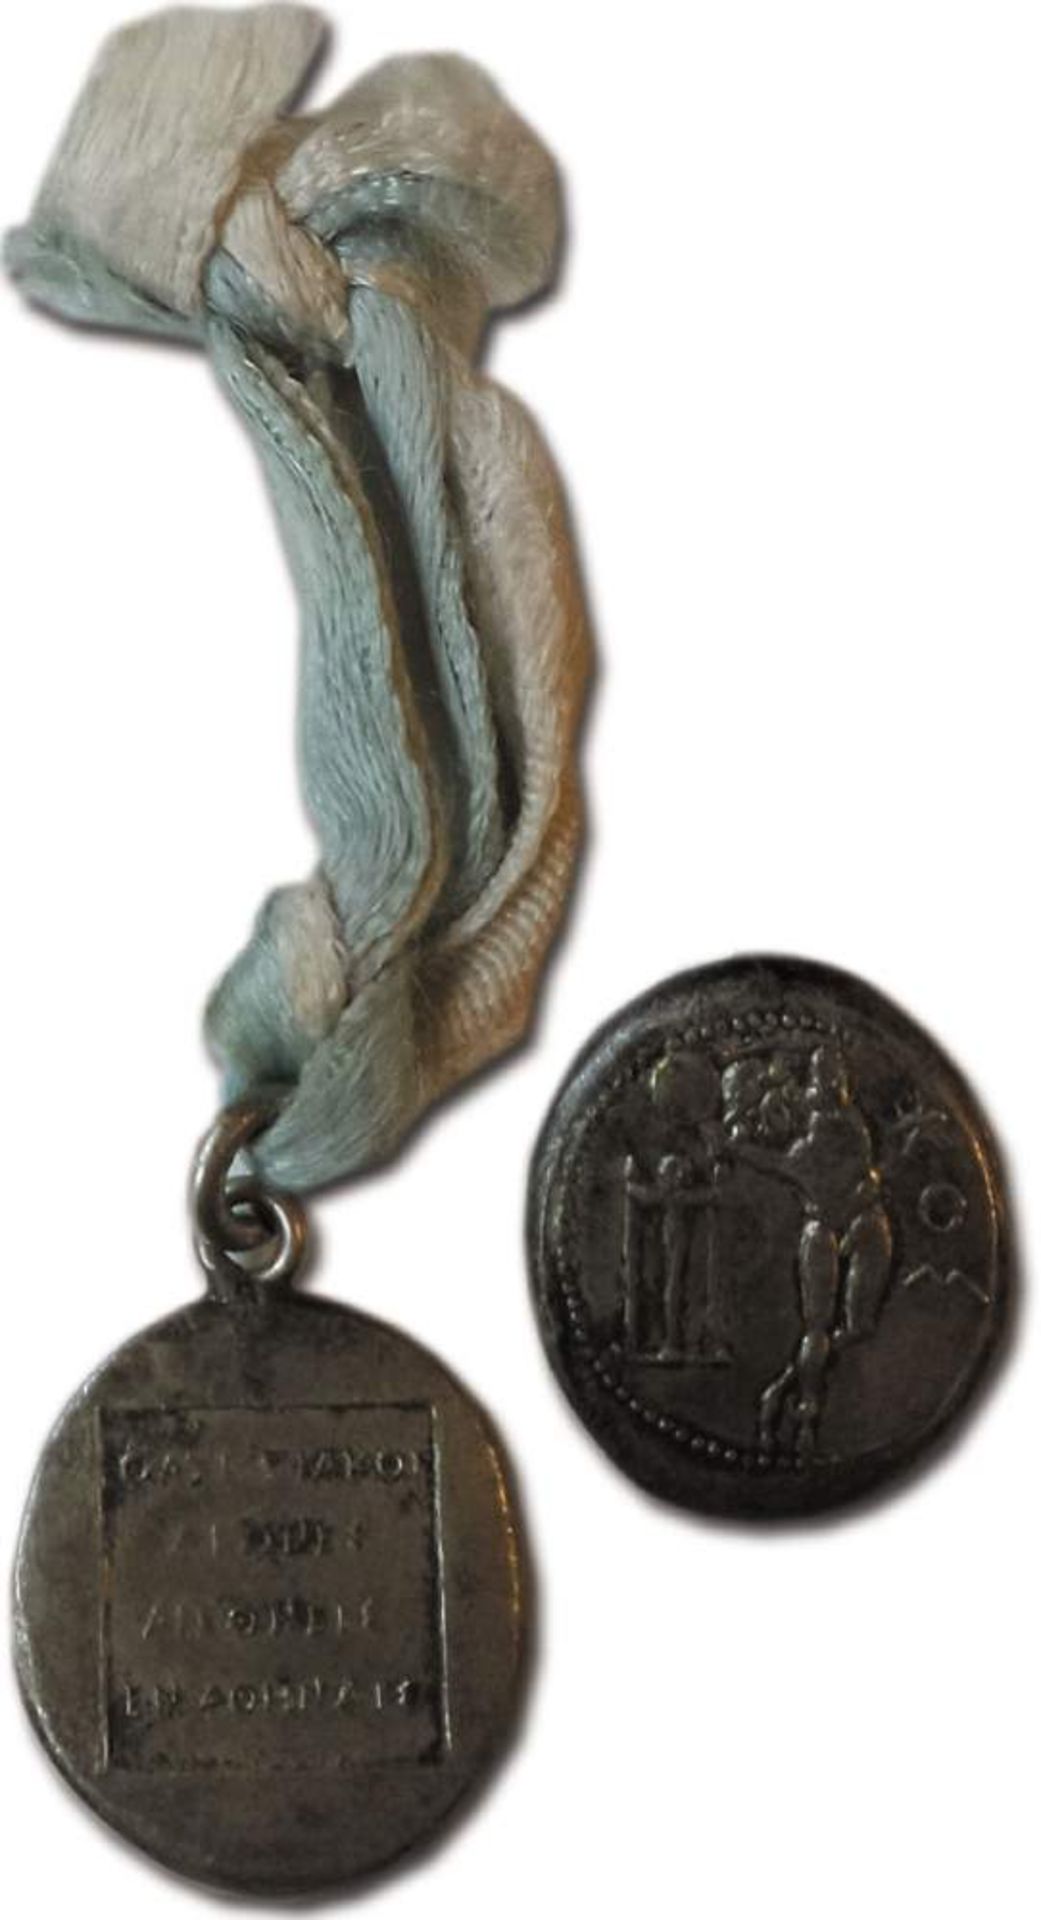 Olympic Games 1906 Participation Medal - Official participation medal of the Greek OC of the Olympic